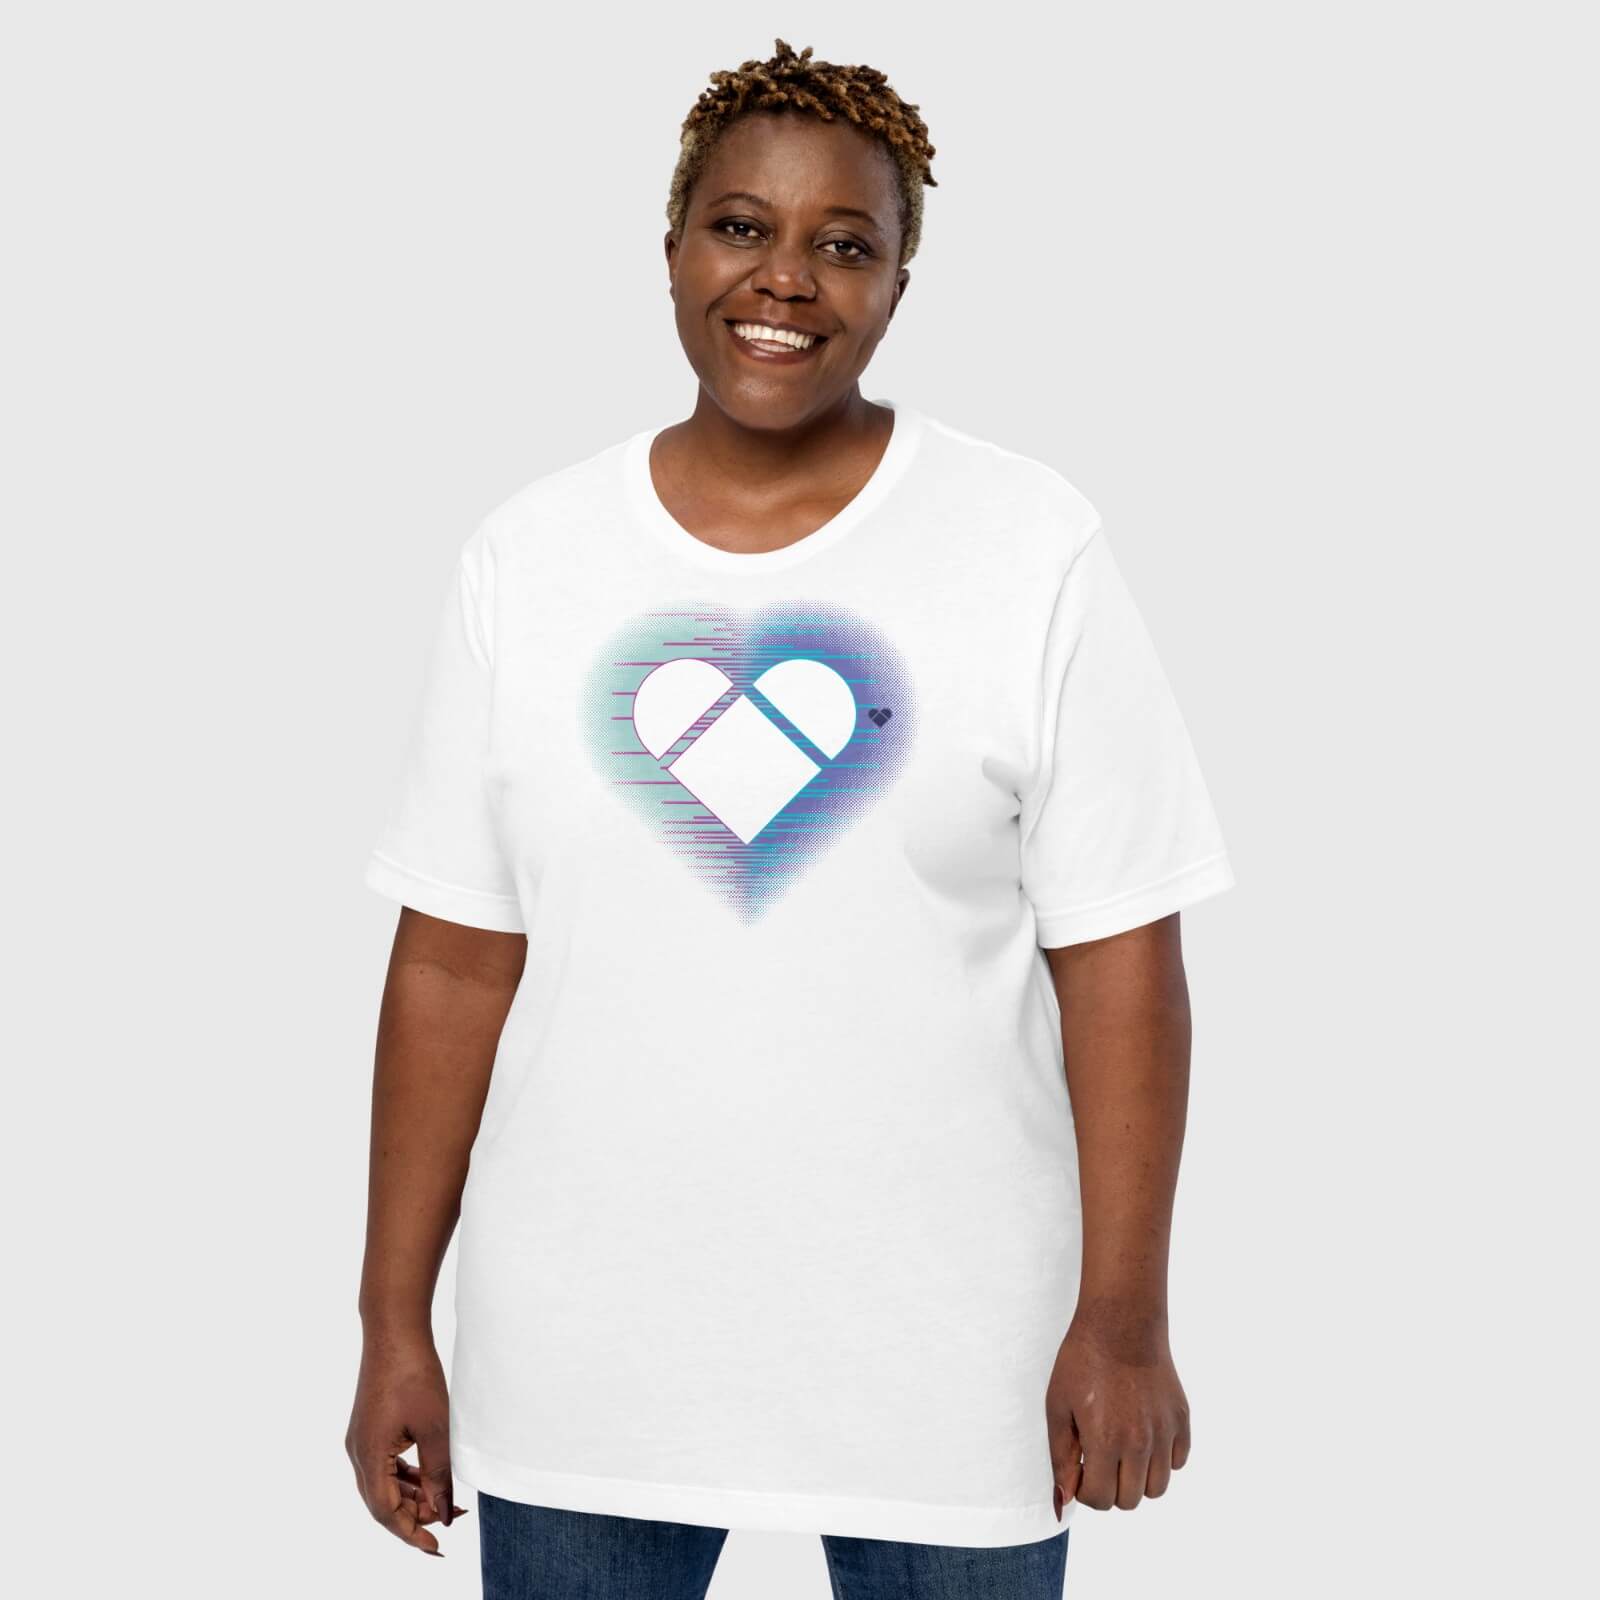 Unique design: White Tee with heart logo and dual mint-periwinkle aura from Amor Dual collection